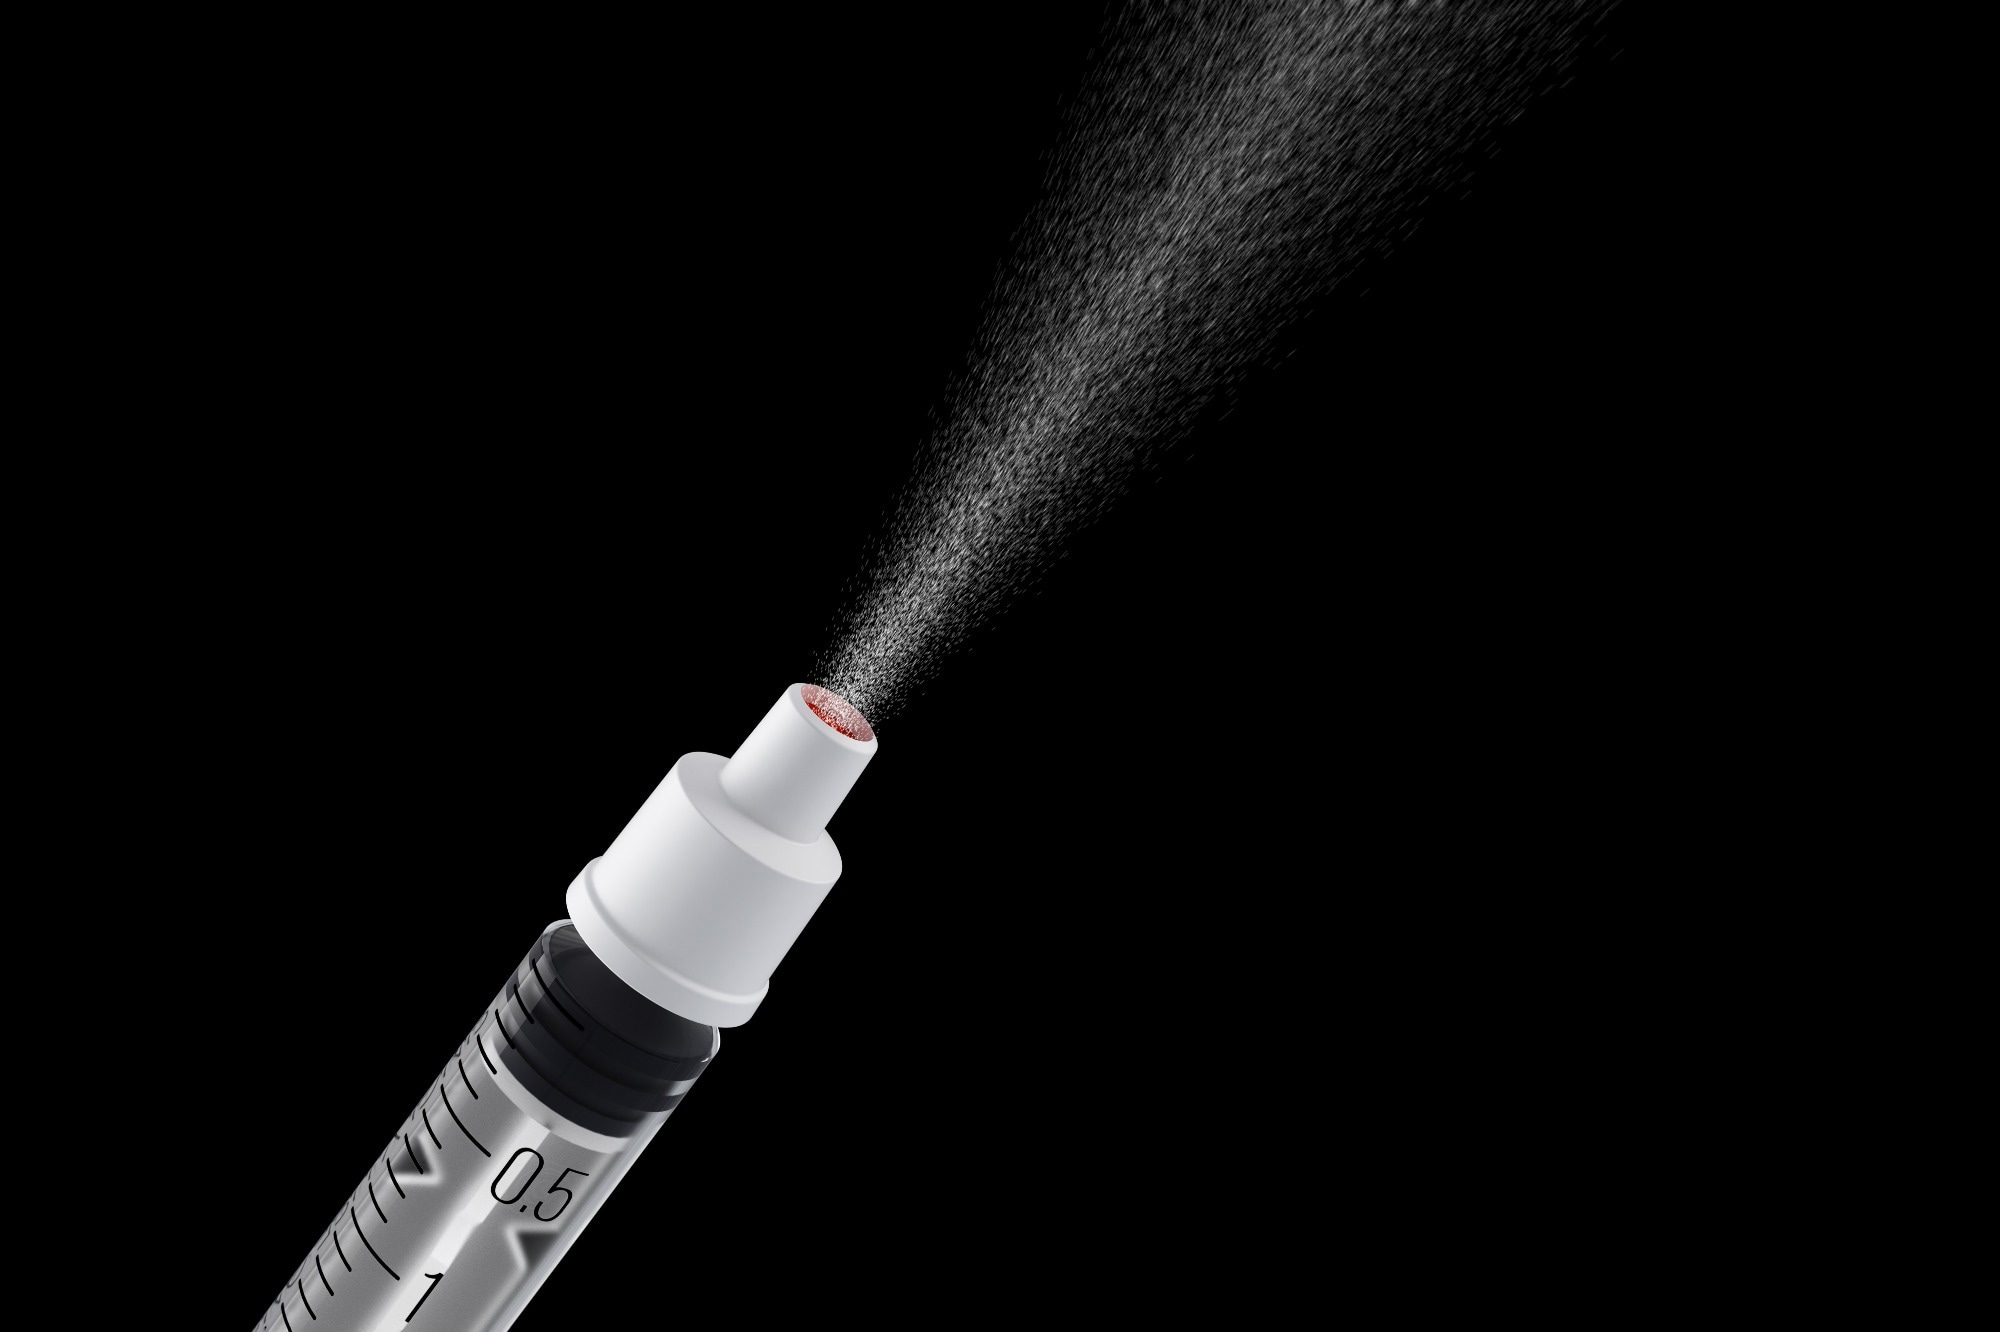 Study: Protection against SARS-CoV-2 transmission by a parenteral prime—Intranasal boost vaccine strategy. Image Credit: Sergey Chips / Shutterstock